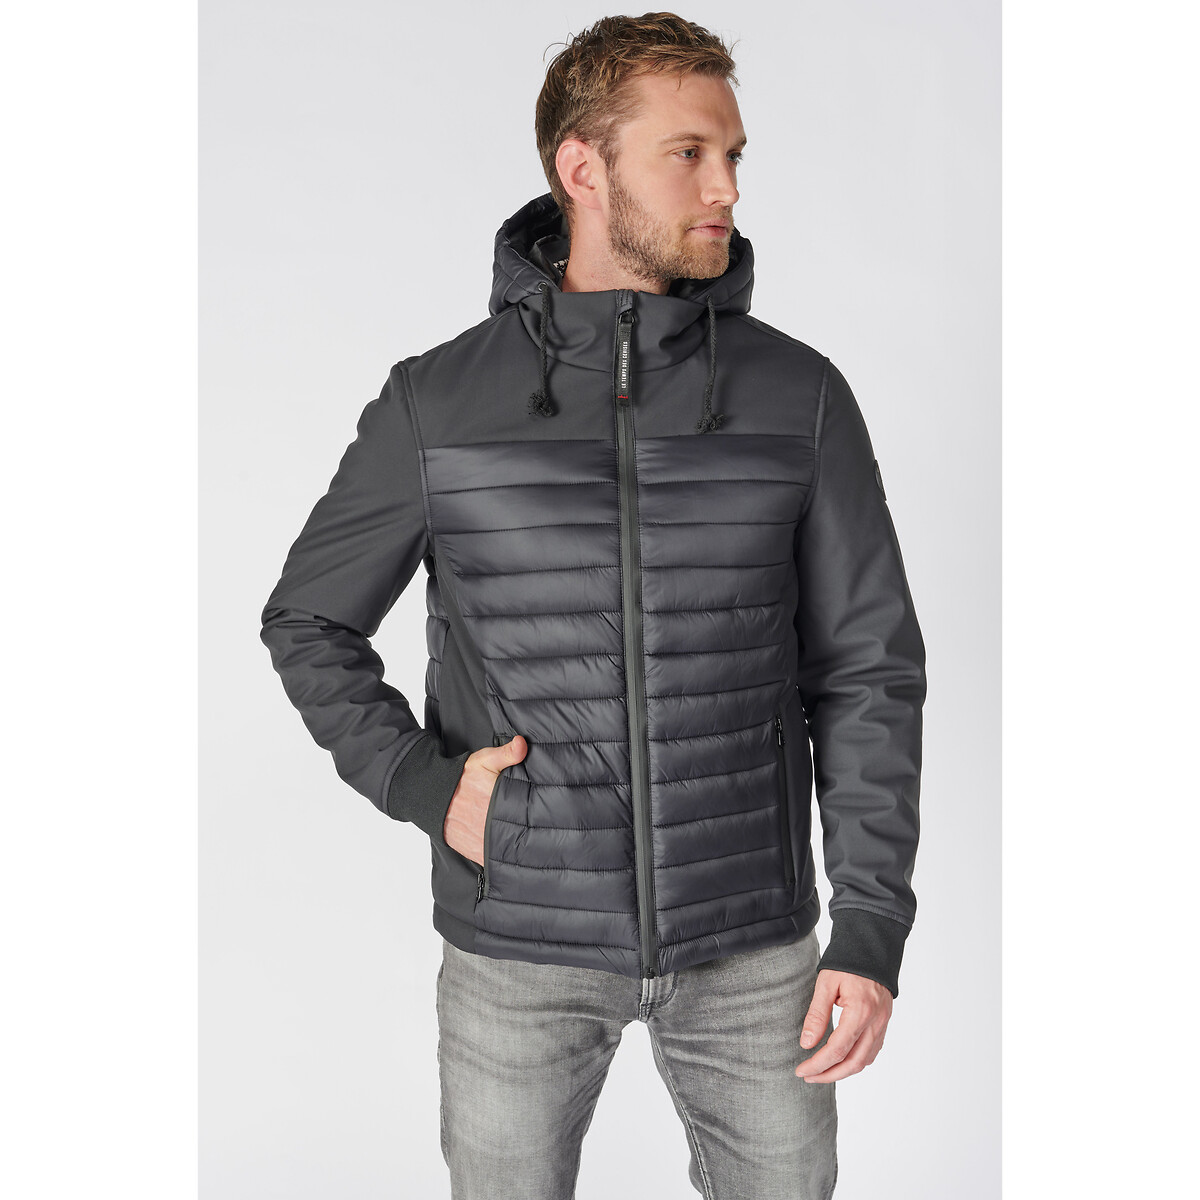 Short Hooded Jacket with High Neck, Mid-Season